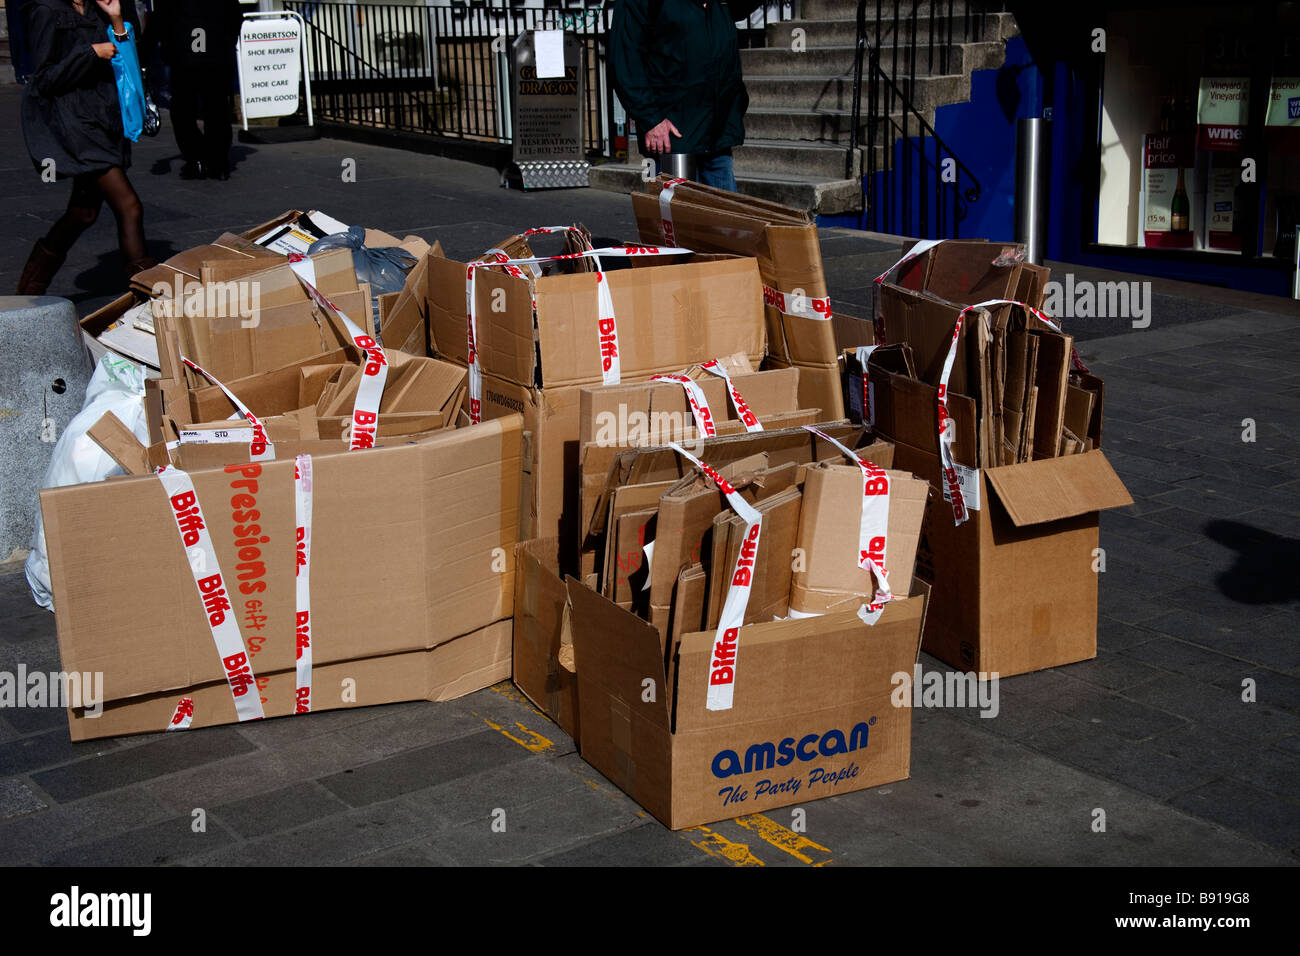 Cardboard boxes folded ready for collection for recycle, Edinburgh, Scotland, UK, Europe Stock Photo